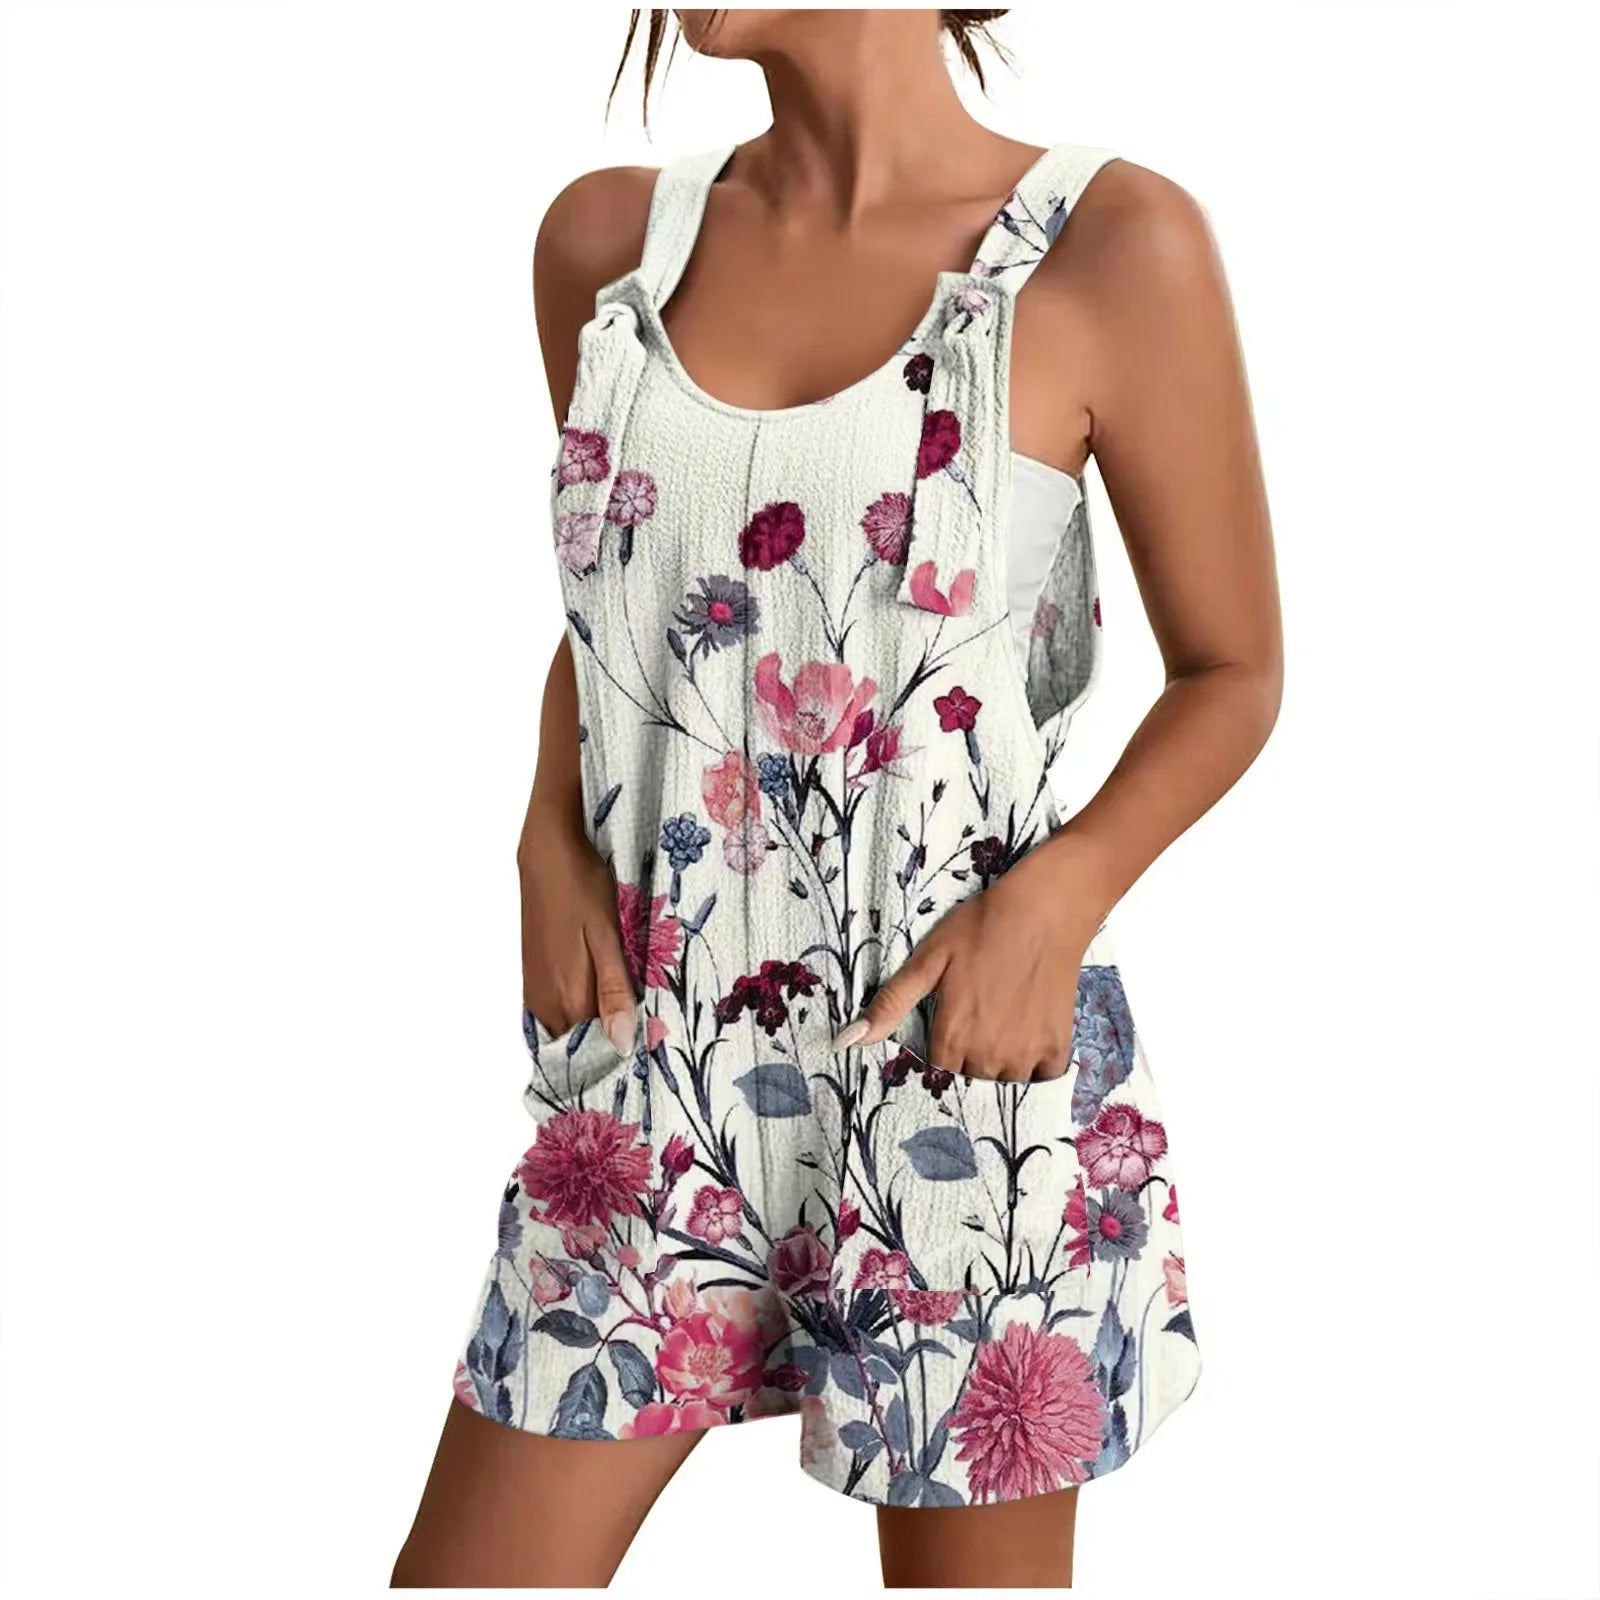  Women White Floral Overall Jumper 